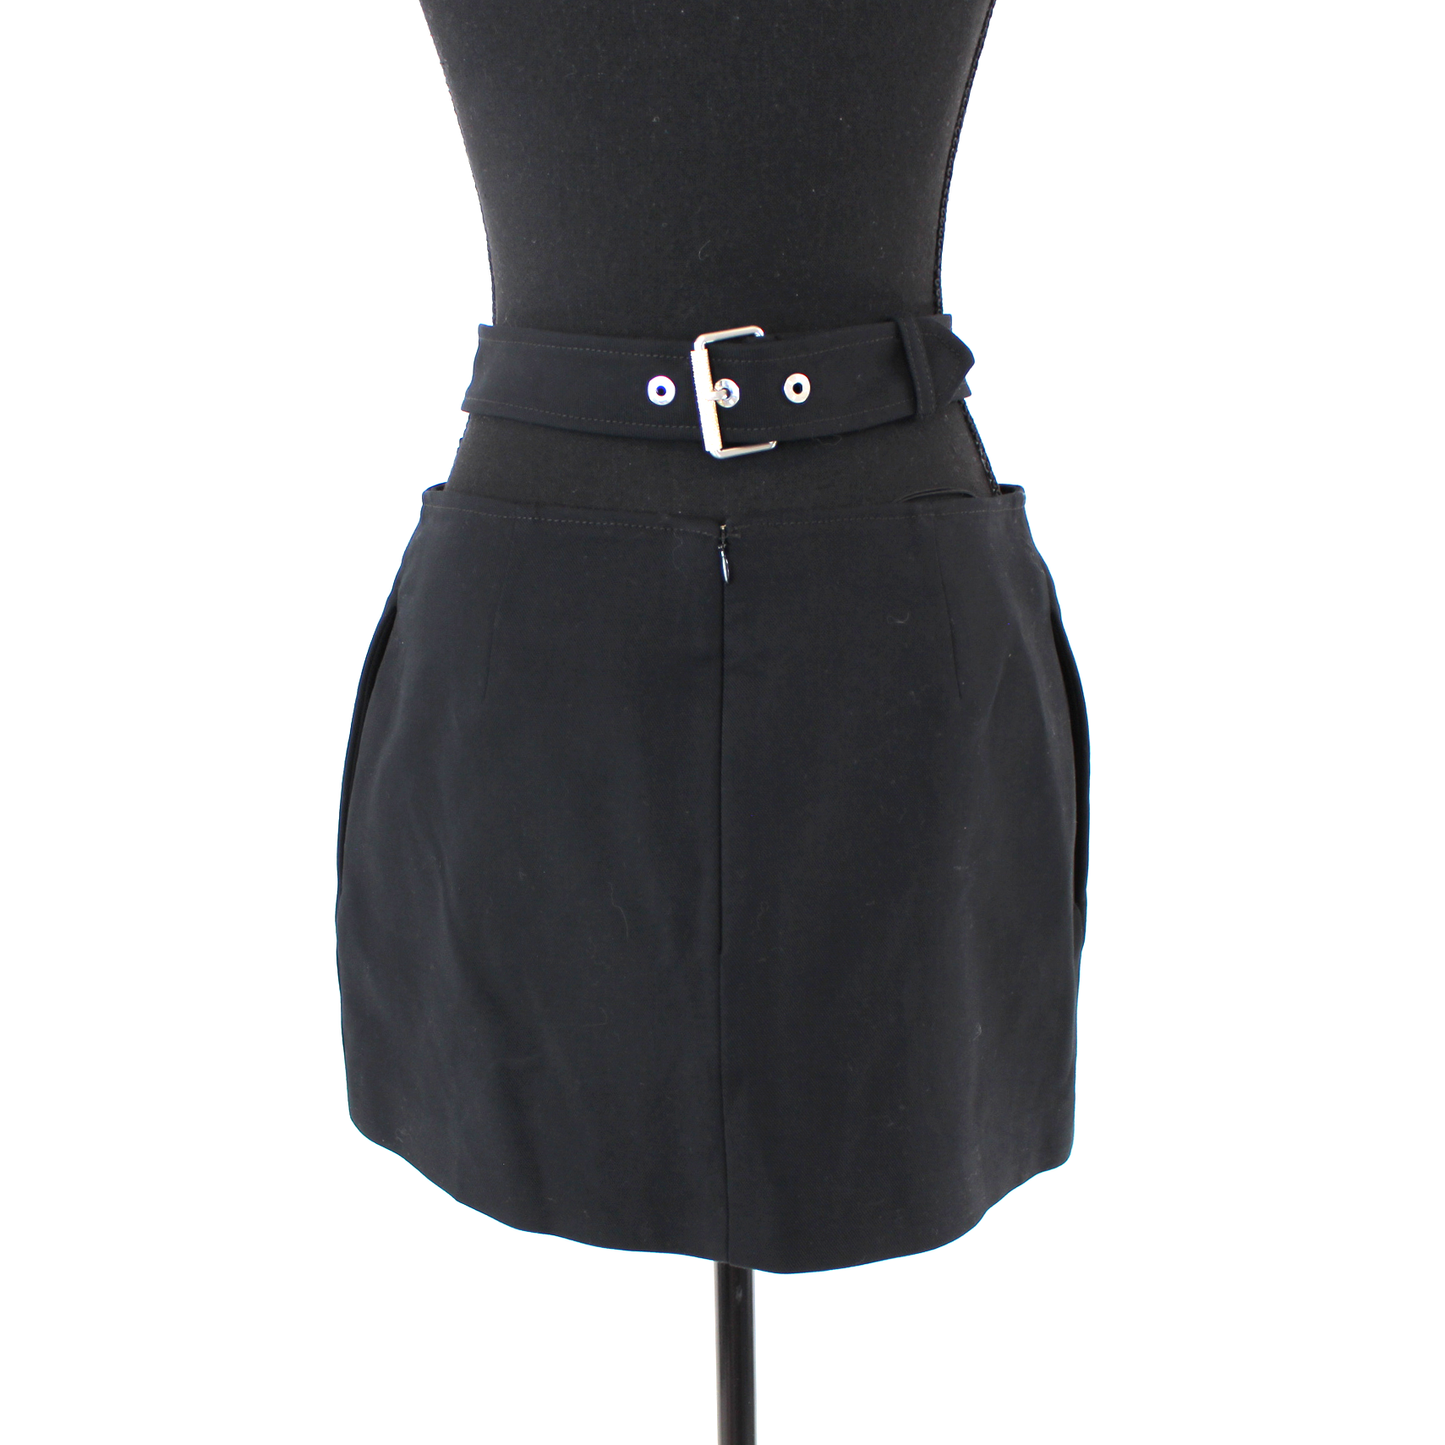 Dion Lee Y Front Buckle Skirt